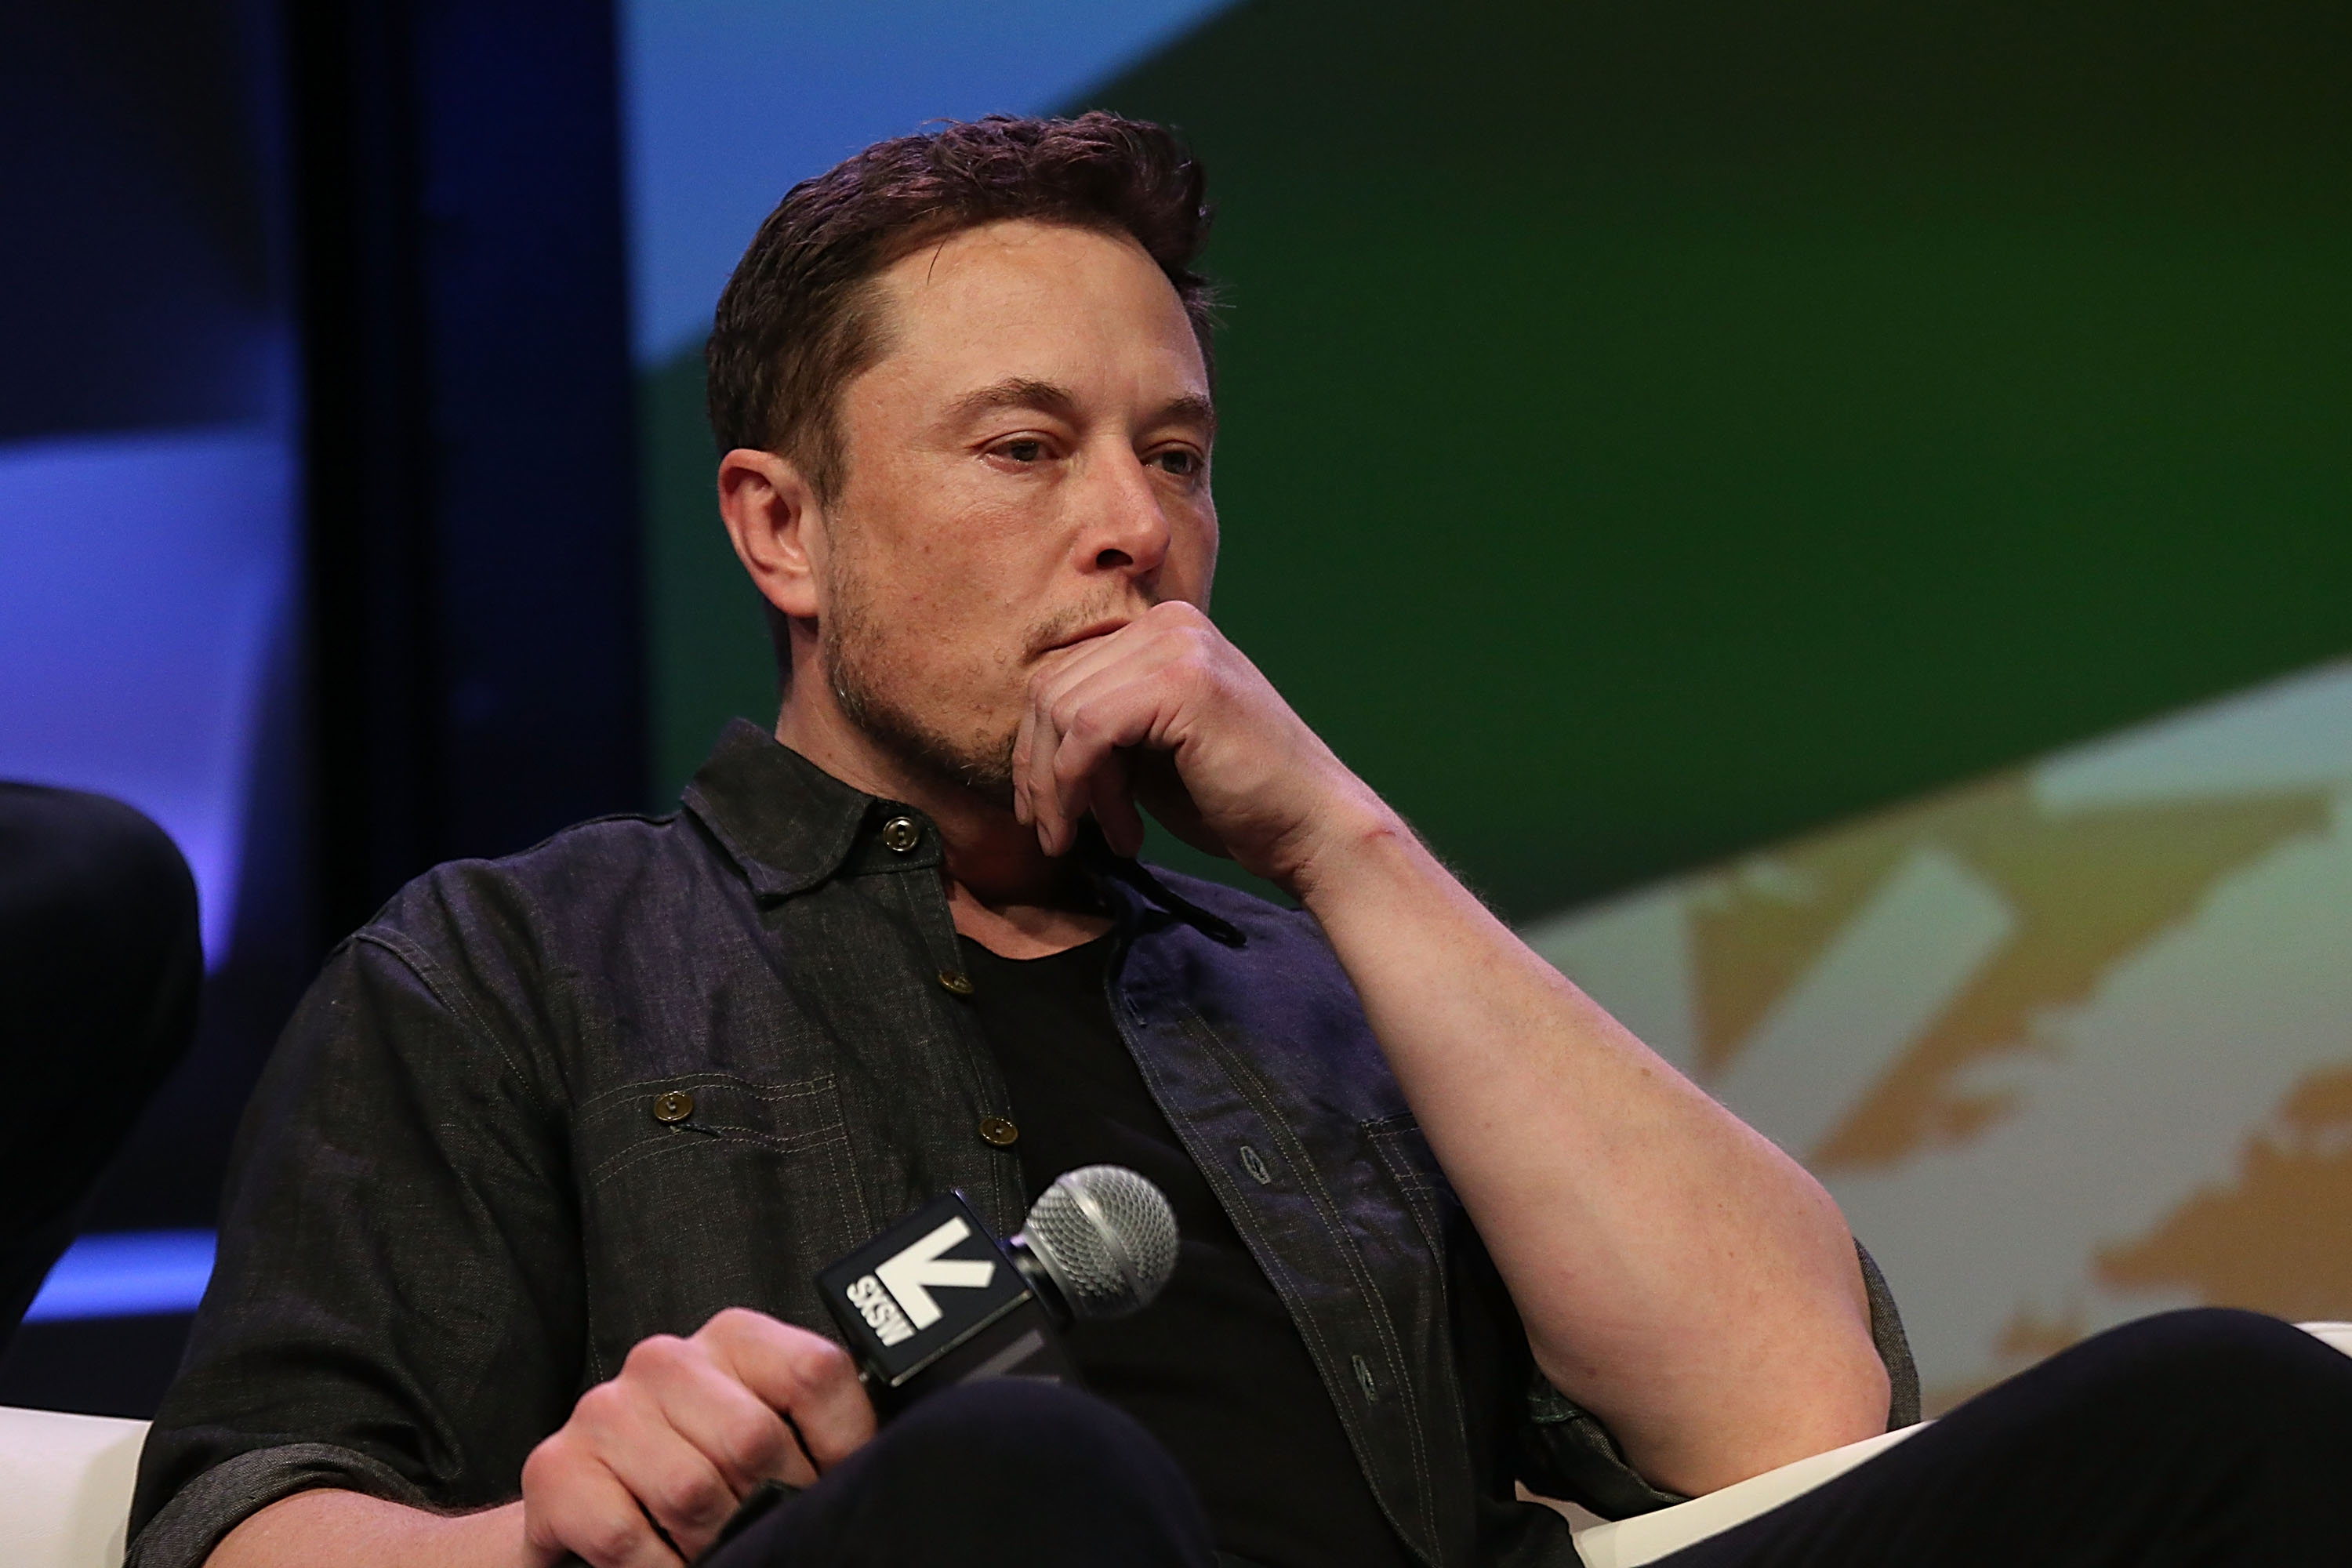 Elon Musk sitting in a chair onstage, holding his chin in one hand and a microphone in the other.